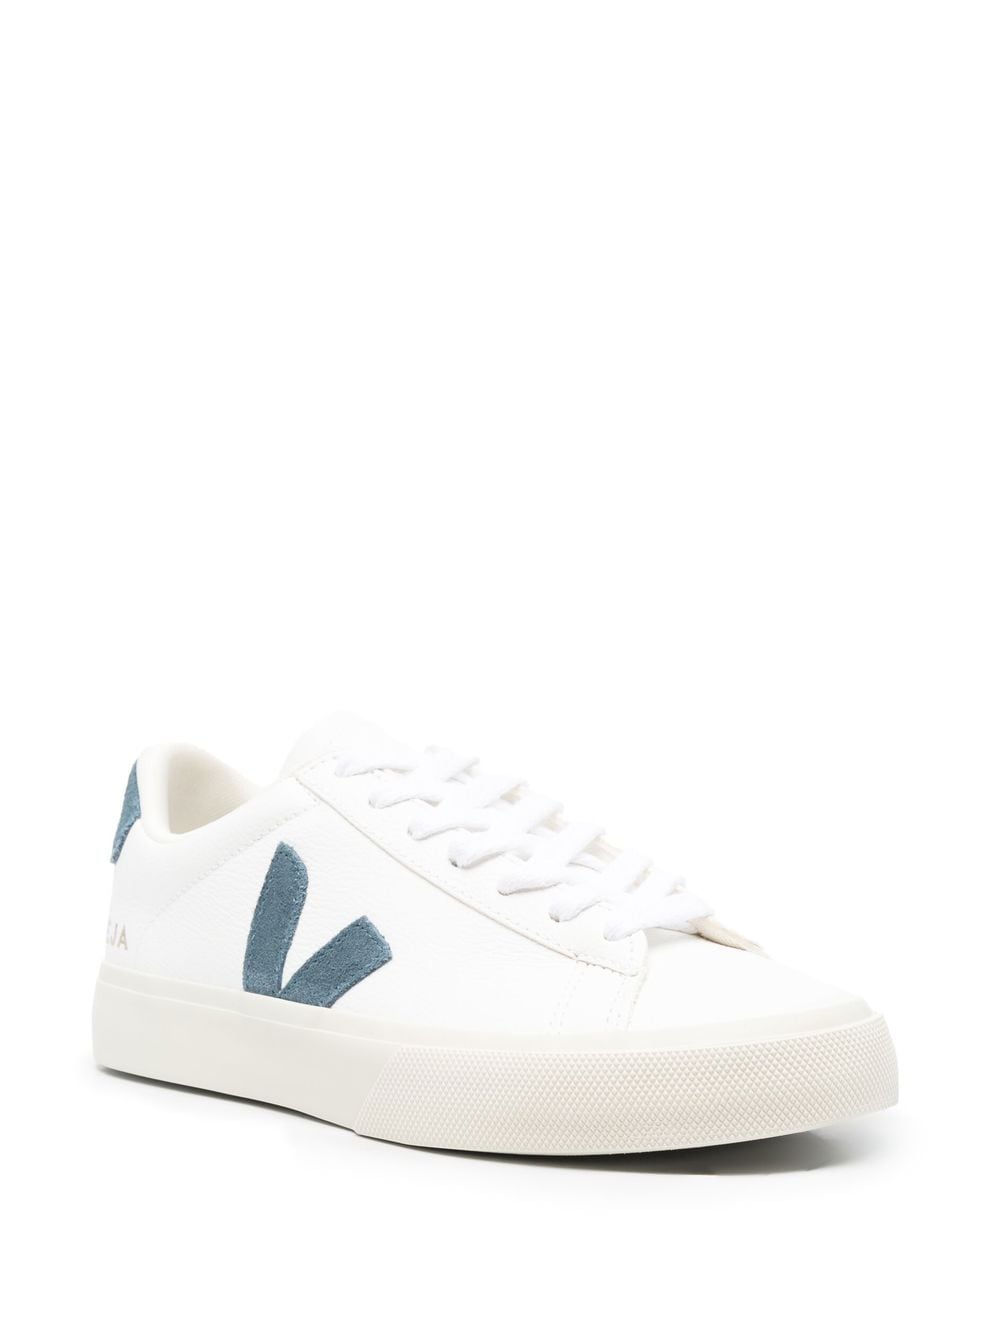 Campo low-top sneakers<BR/><BR/><BR/>